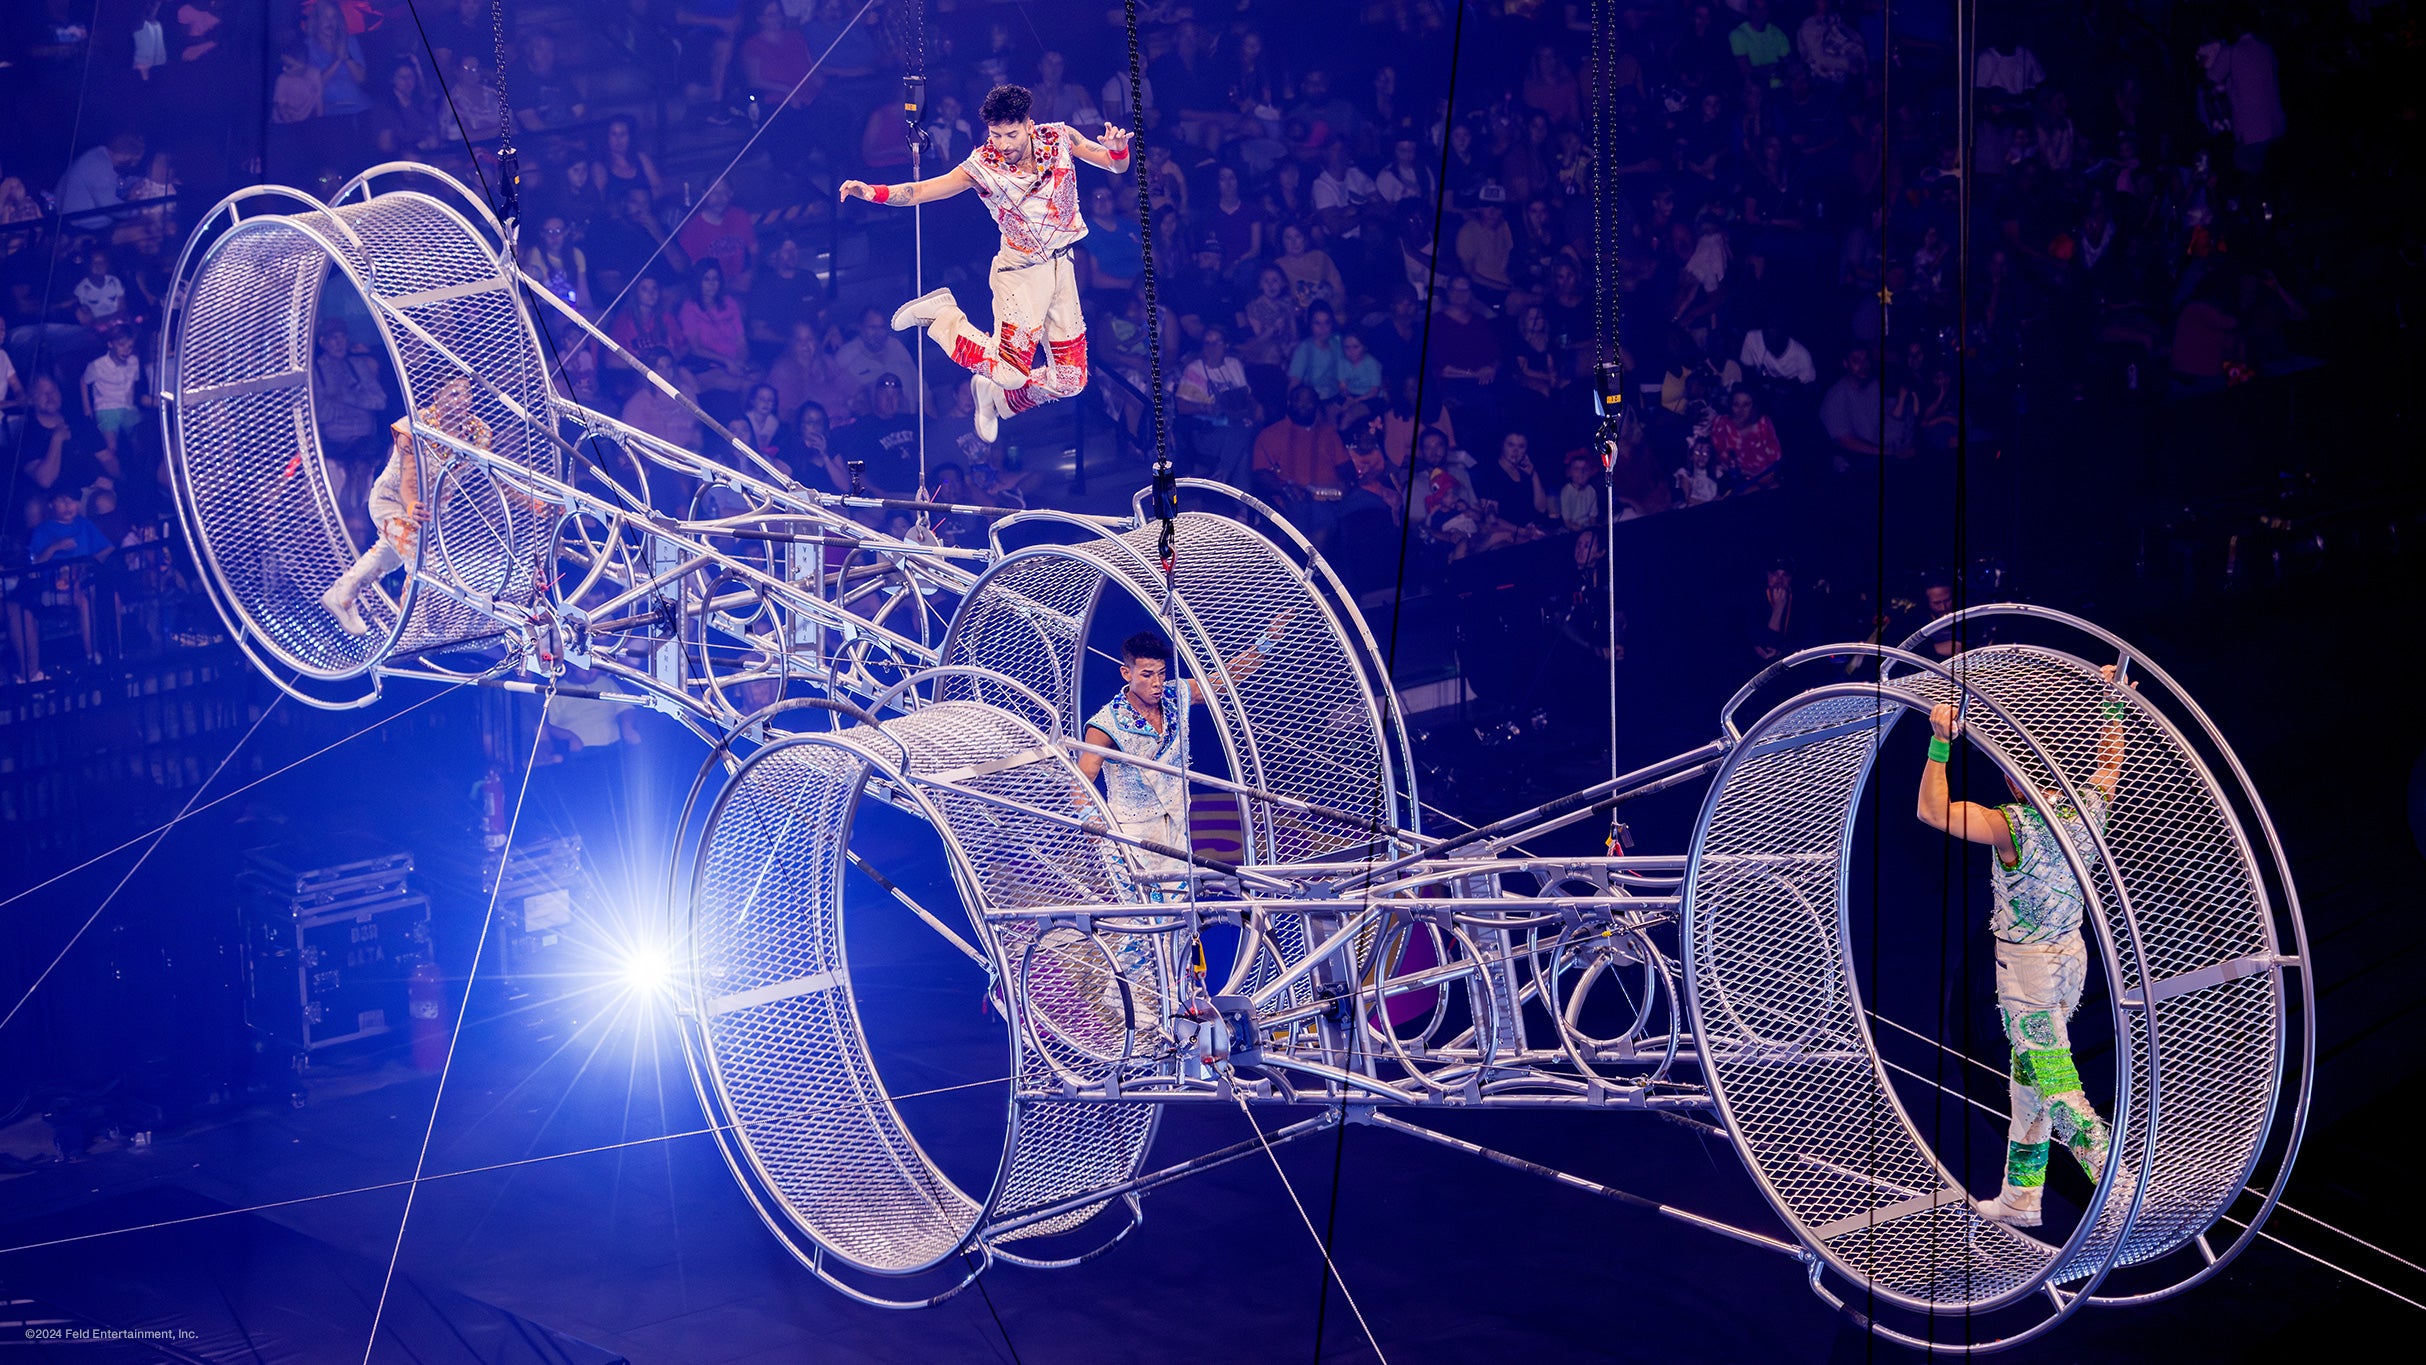 Ringling Bros. and Barnum & Bailey presents The Greatest Show On Earth presales in Houston